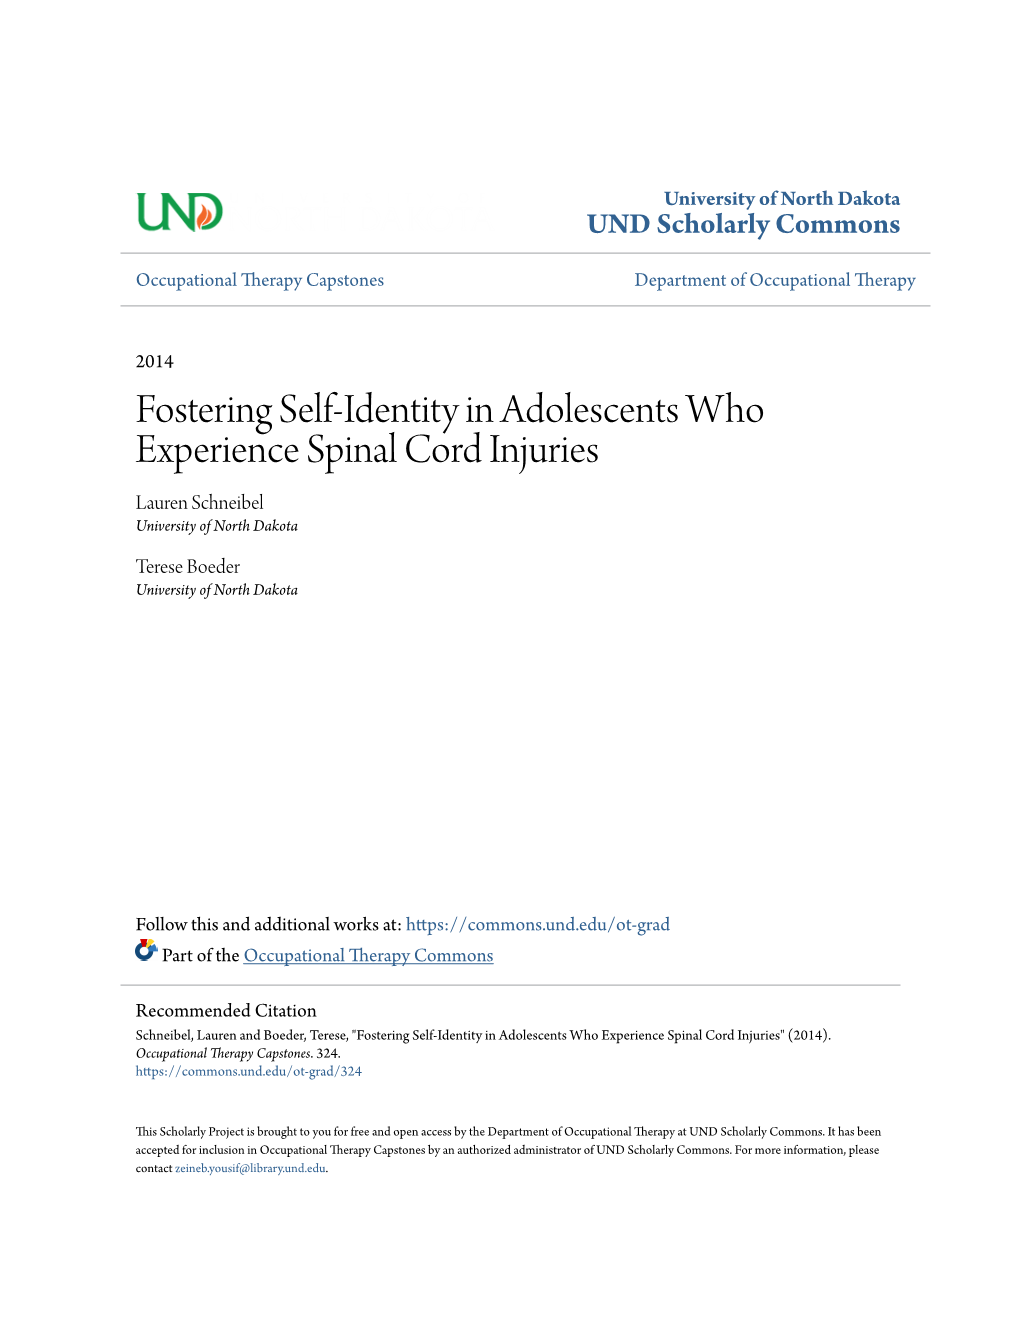 Fostering Self-Identity in Adolescents Who Experience Spinal Cord Injuries Lauren Schneibel University of North Dakota